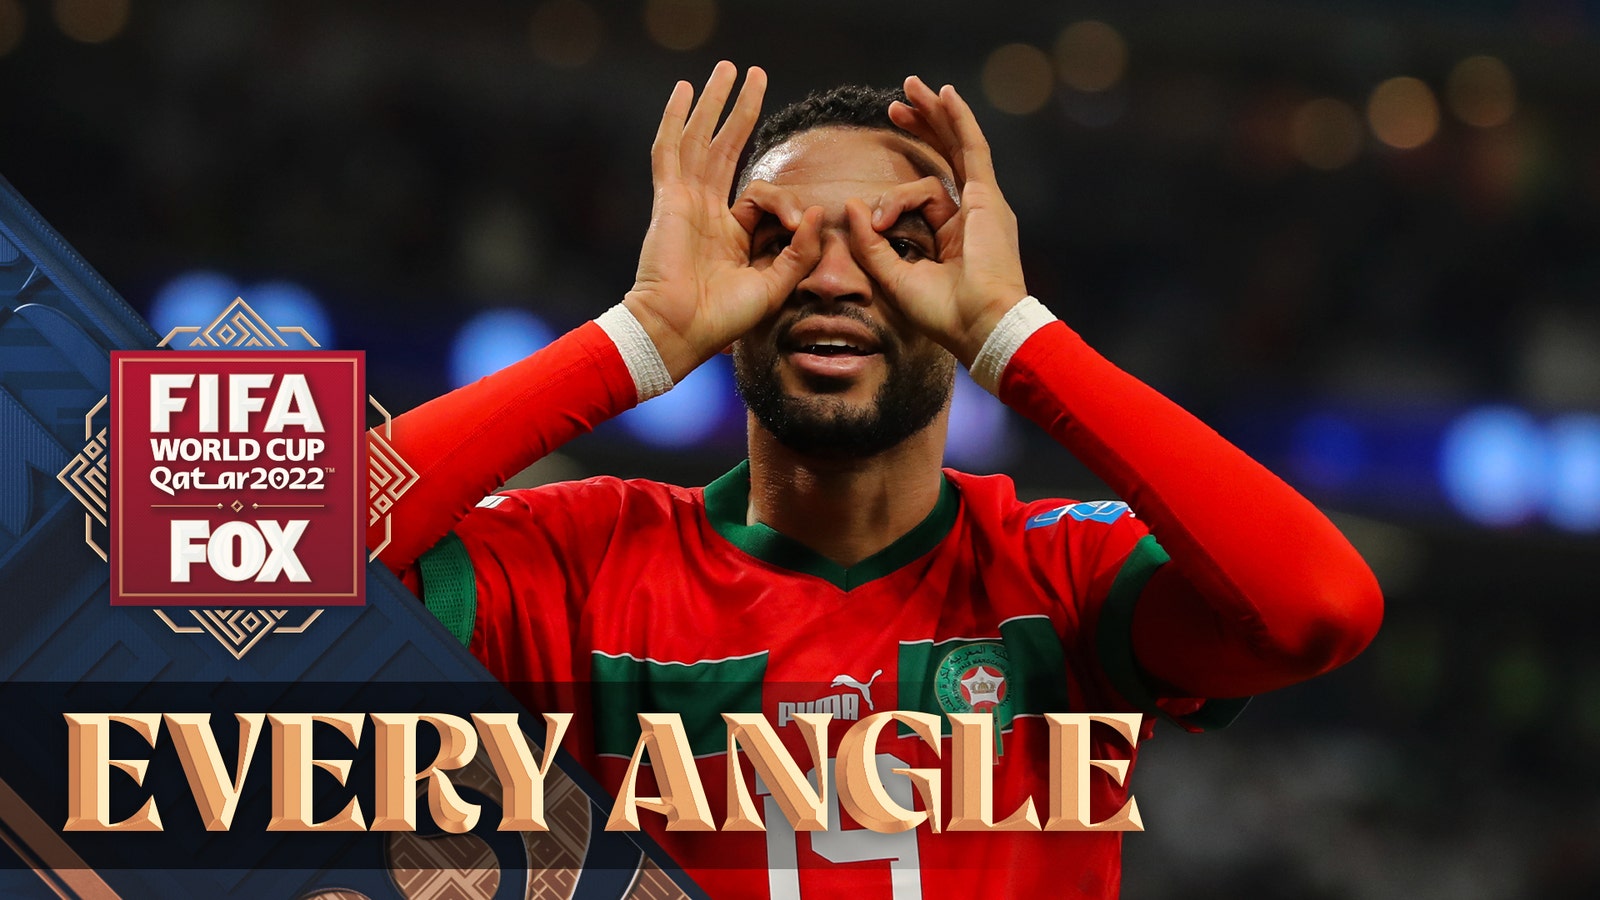 Youssef En-Nessiri scores a RIDICULOUS header for Morocco at FIFA World Cup 2022 |  Every angle